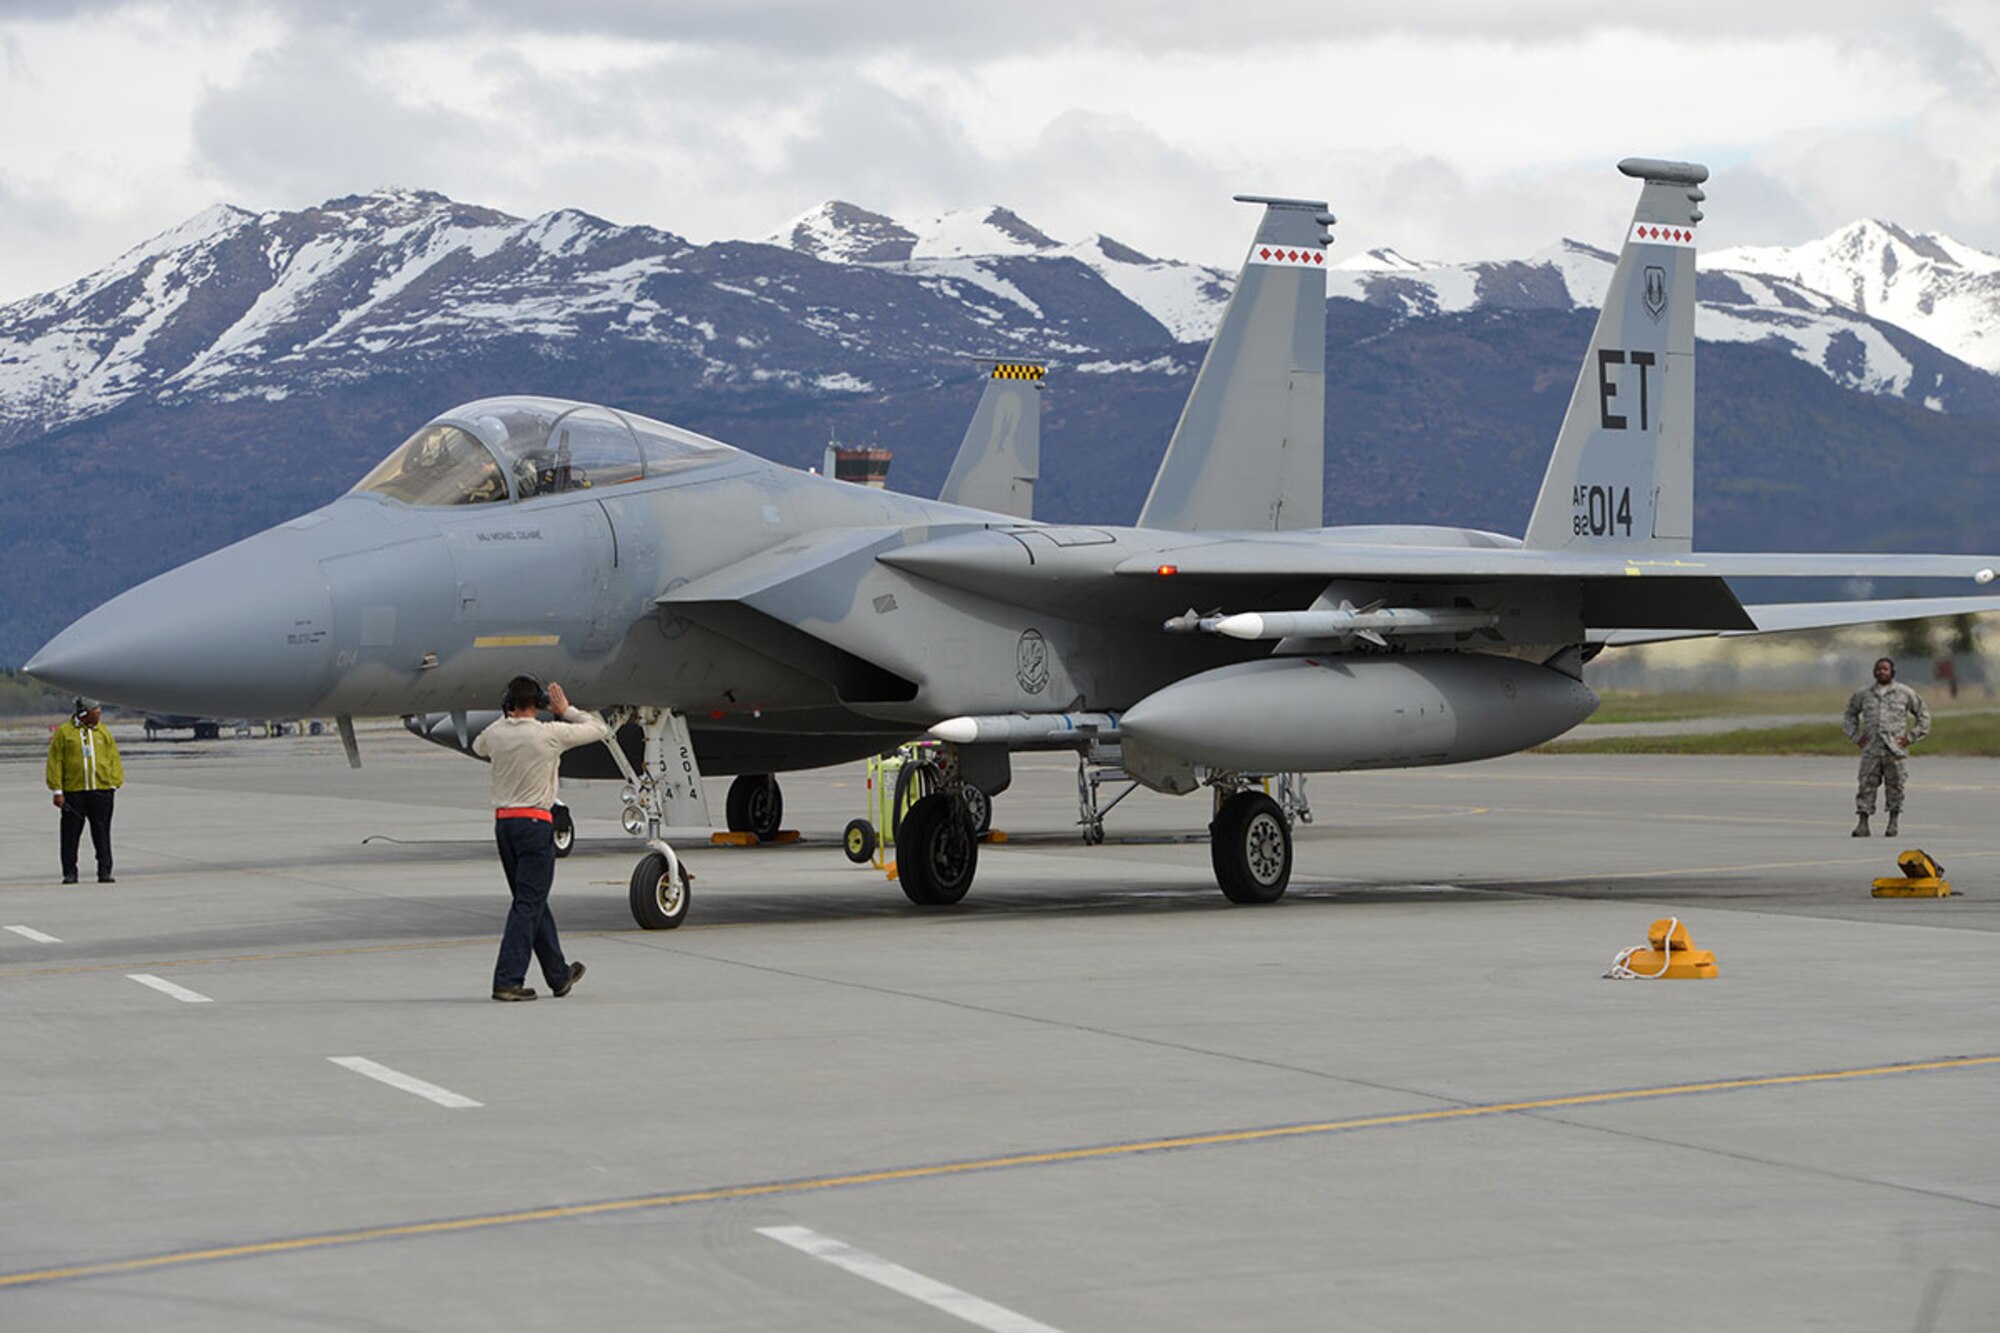 A U.S. Air Force F-15 Eagle from Eglin Air Force Base, Fla., taxis for departure on the Joint Base Elmendorf-Richardson flightline, May 3, 2016. The fighter is deployed to JBER as part of Red Flag-Alaska, a Pacific Air Forces commander-directed field training exercises for U.S. and international forces, providing combined offensive counter-air, interdiction, close air support and large force employment training in a simulated combat environment. (U.S. Air Force photo by Airman 1st Class Javier Alvarez)